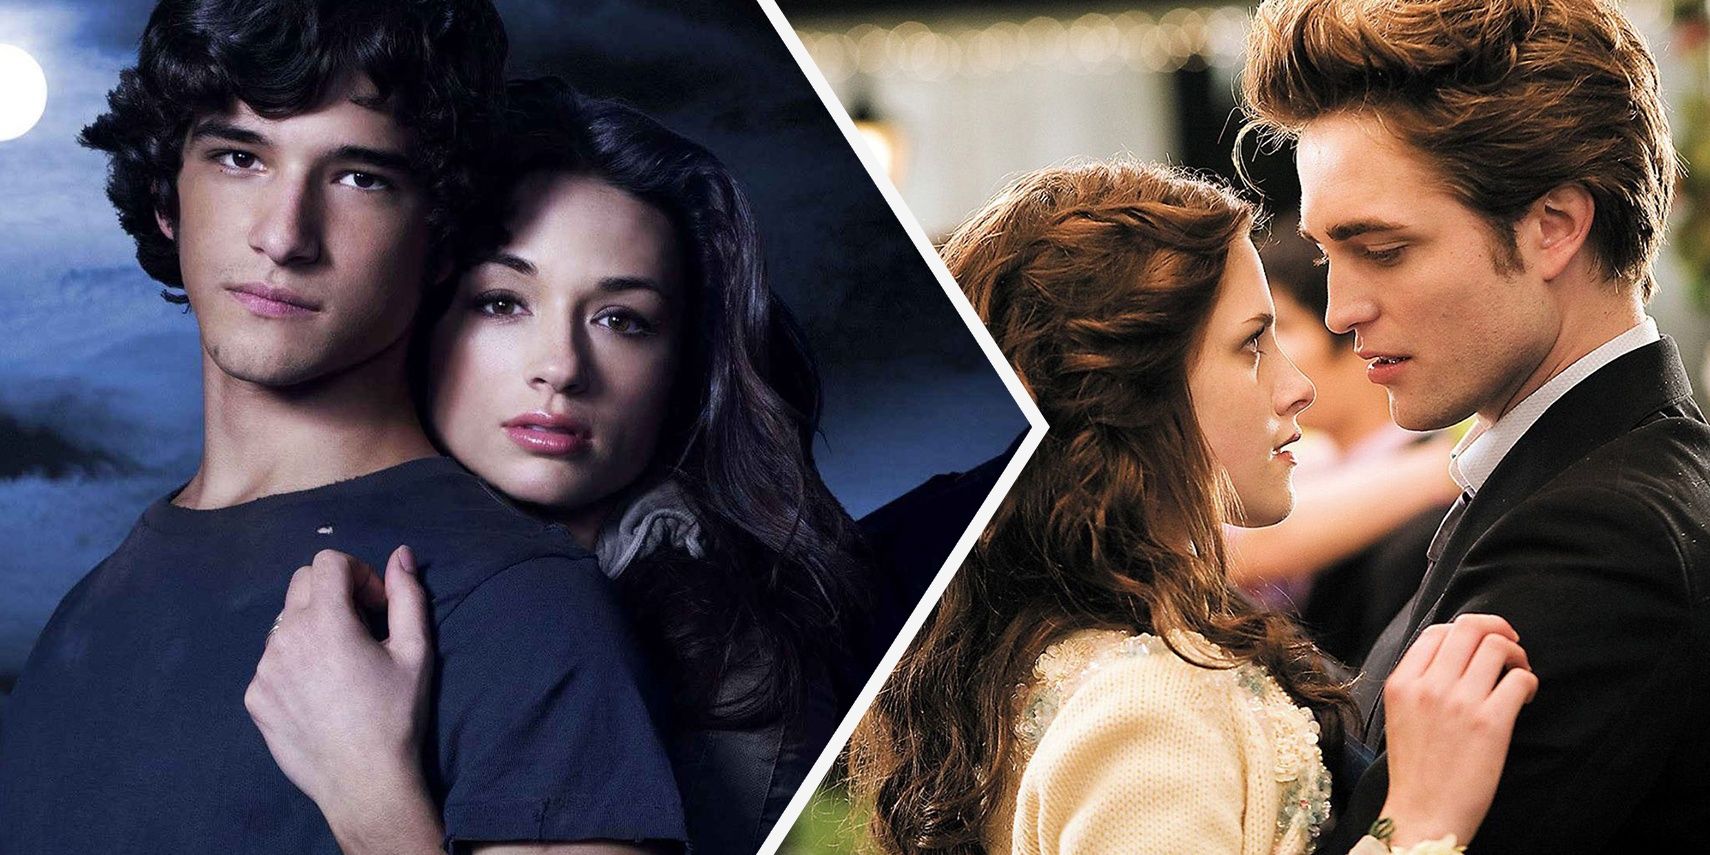 Edward & Bella & 9 Other Great Supernatural Couples From Movies & TV Ranked